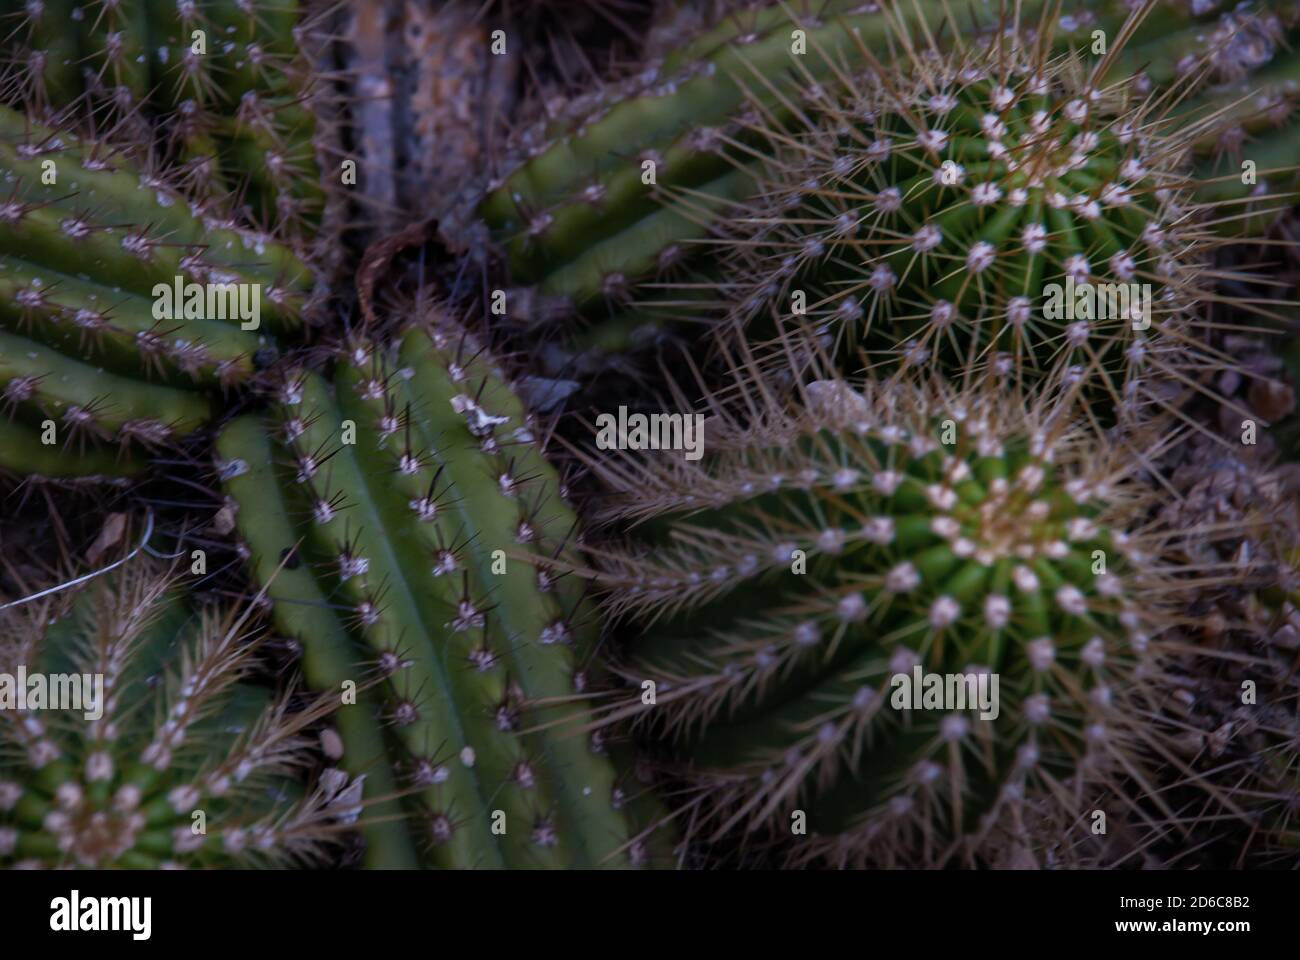 Close up view of clumping groups of tichocereus huascha cactus, also called echinopsis, in the family cactaceae. Pups with ribs. Many yellow colored a Stock Photo